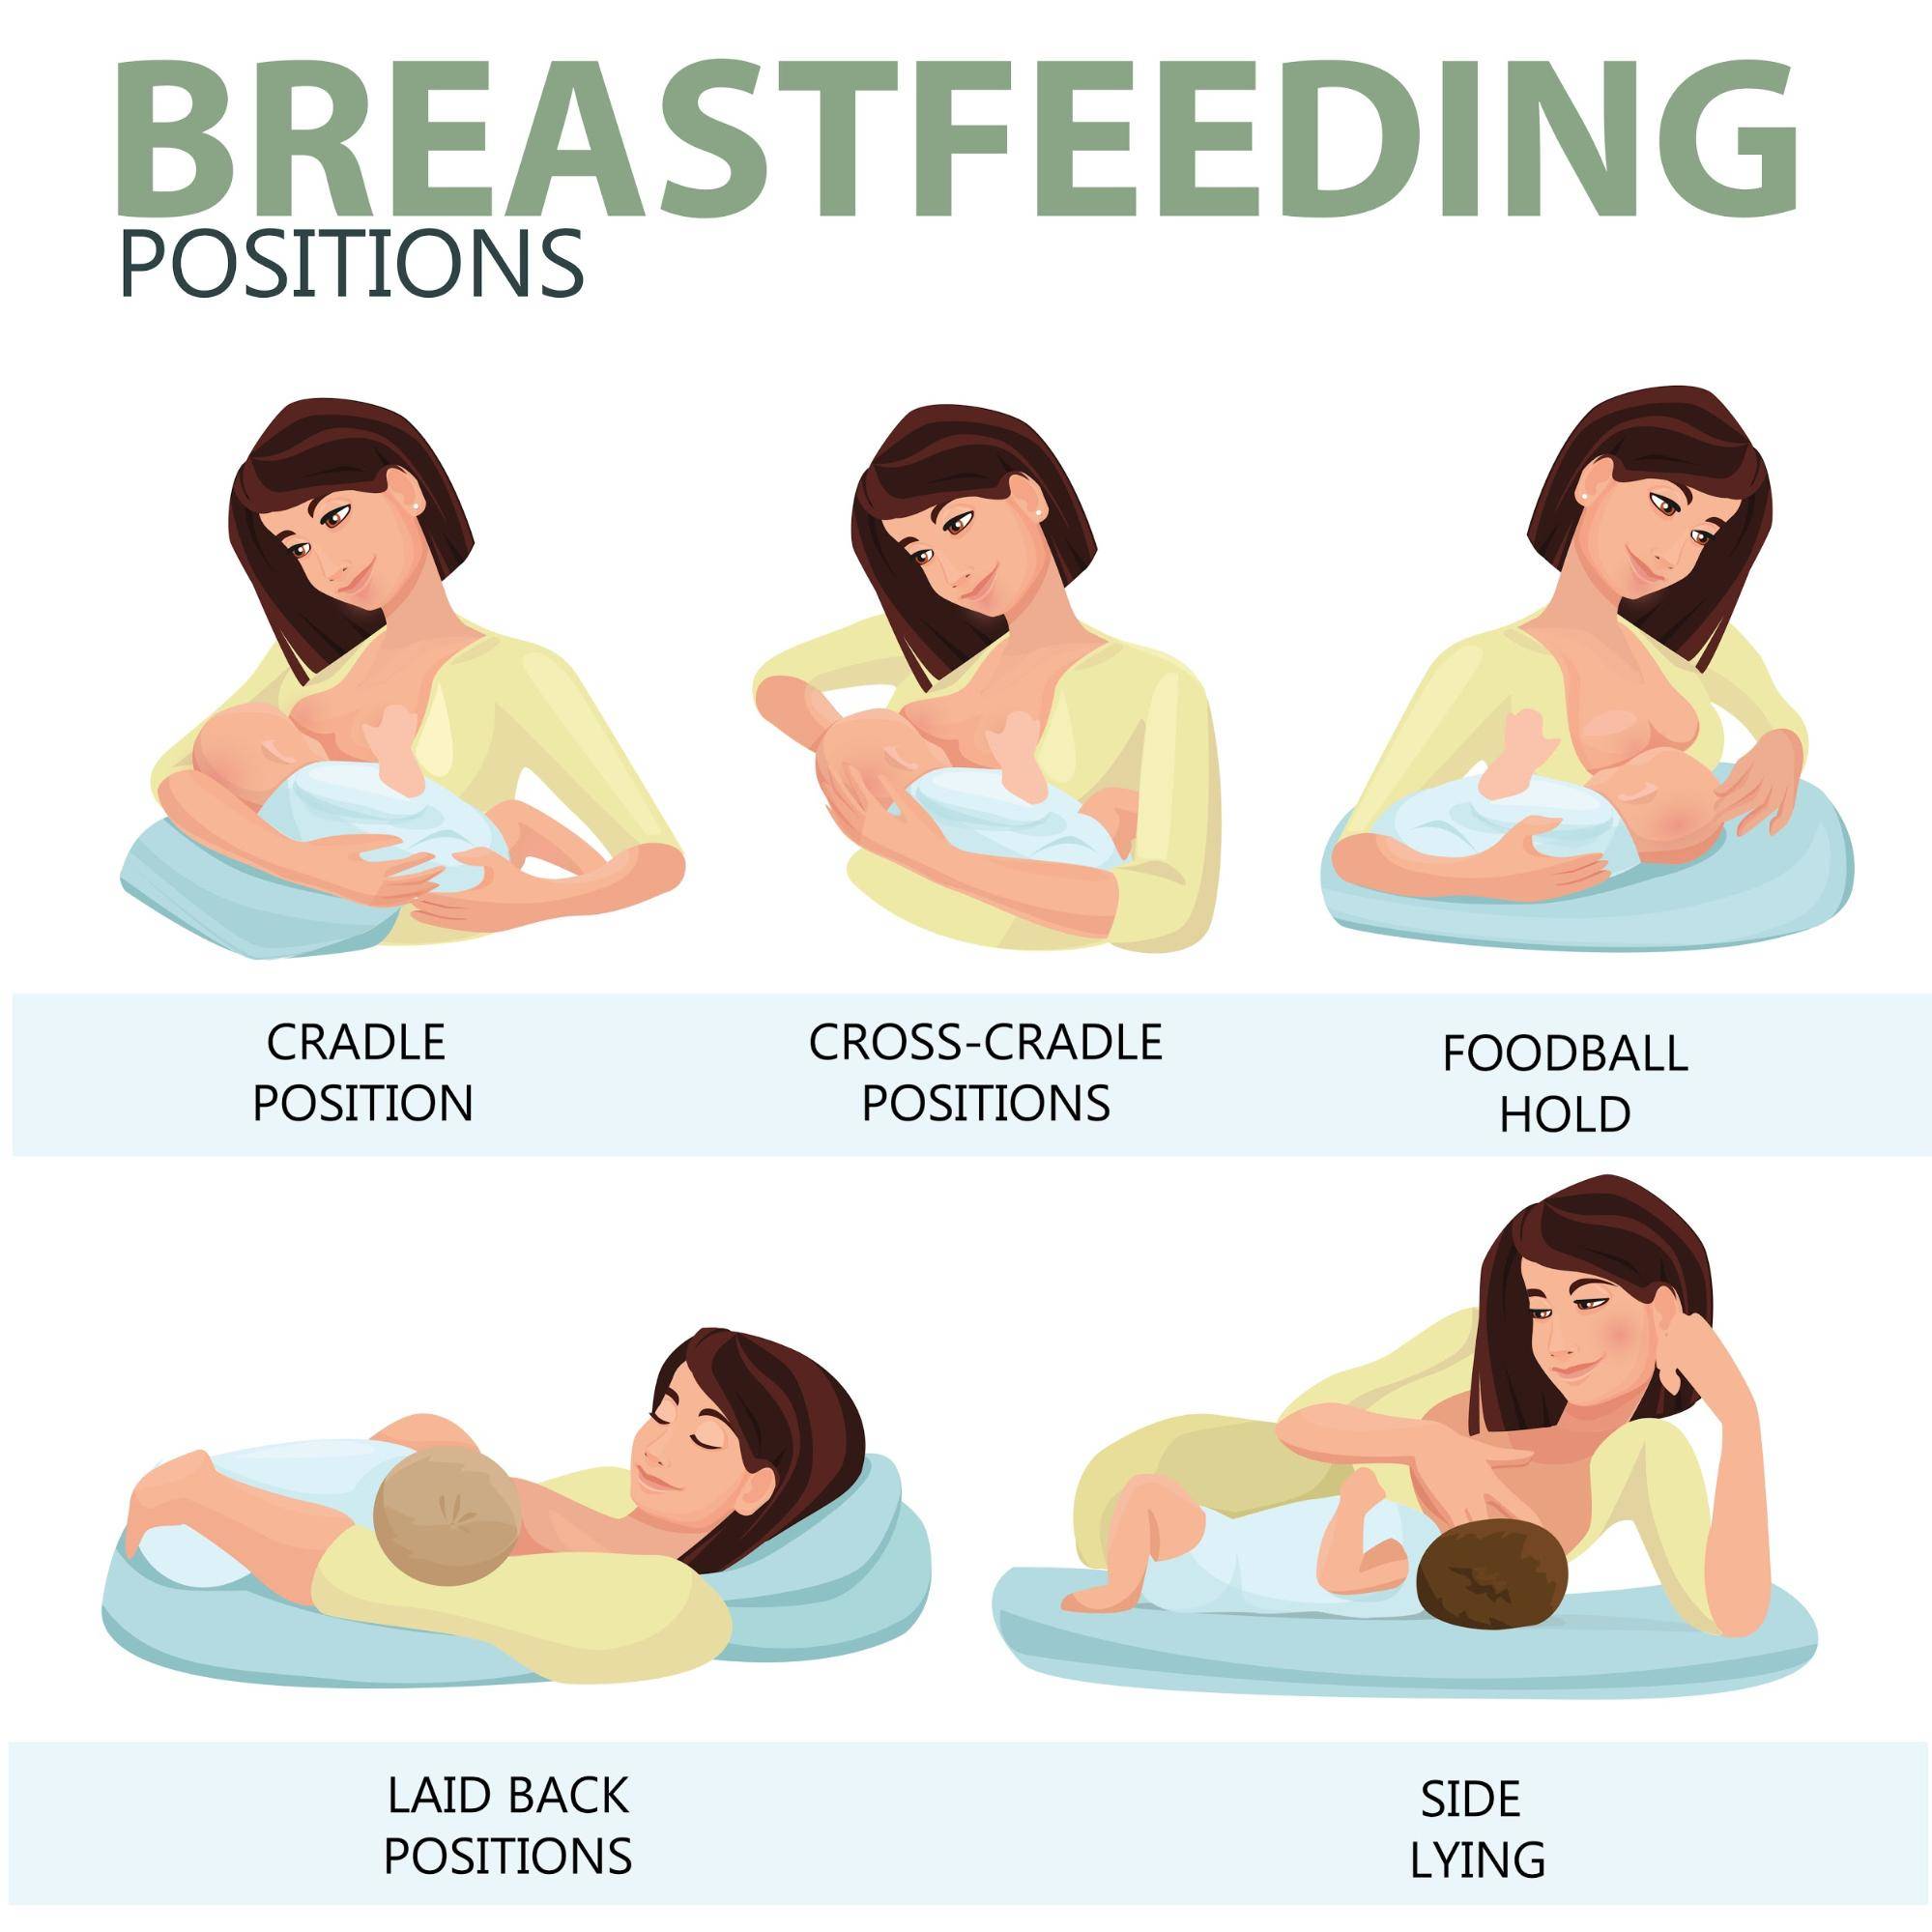 Just Another Breastfeeding Story